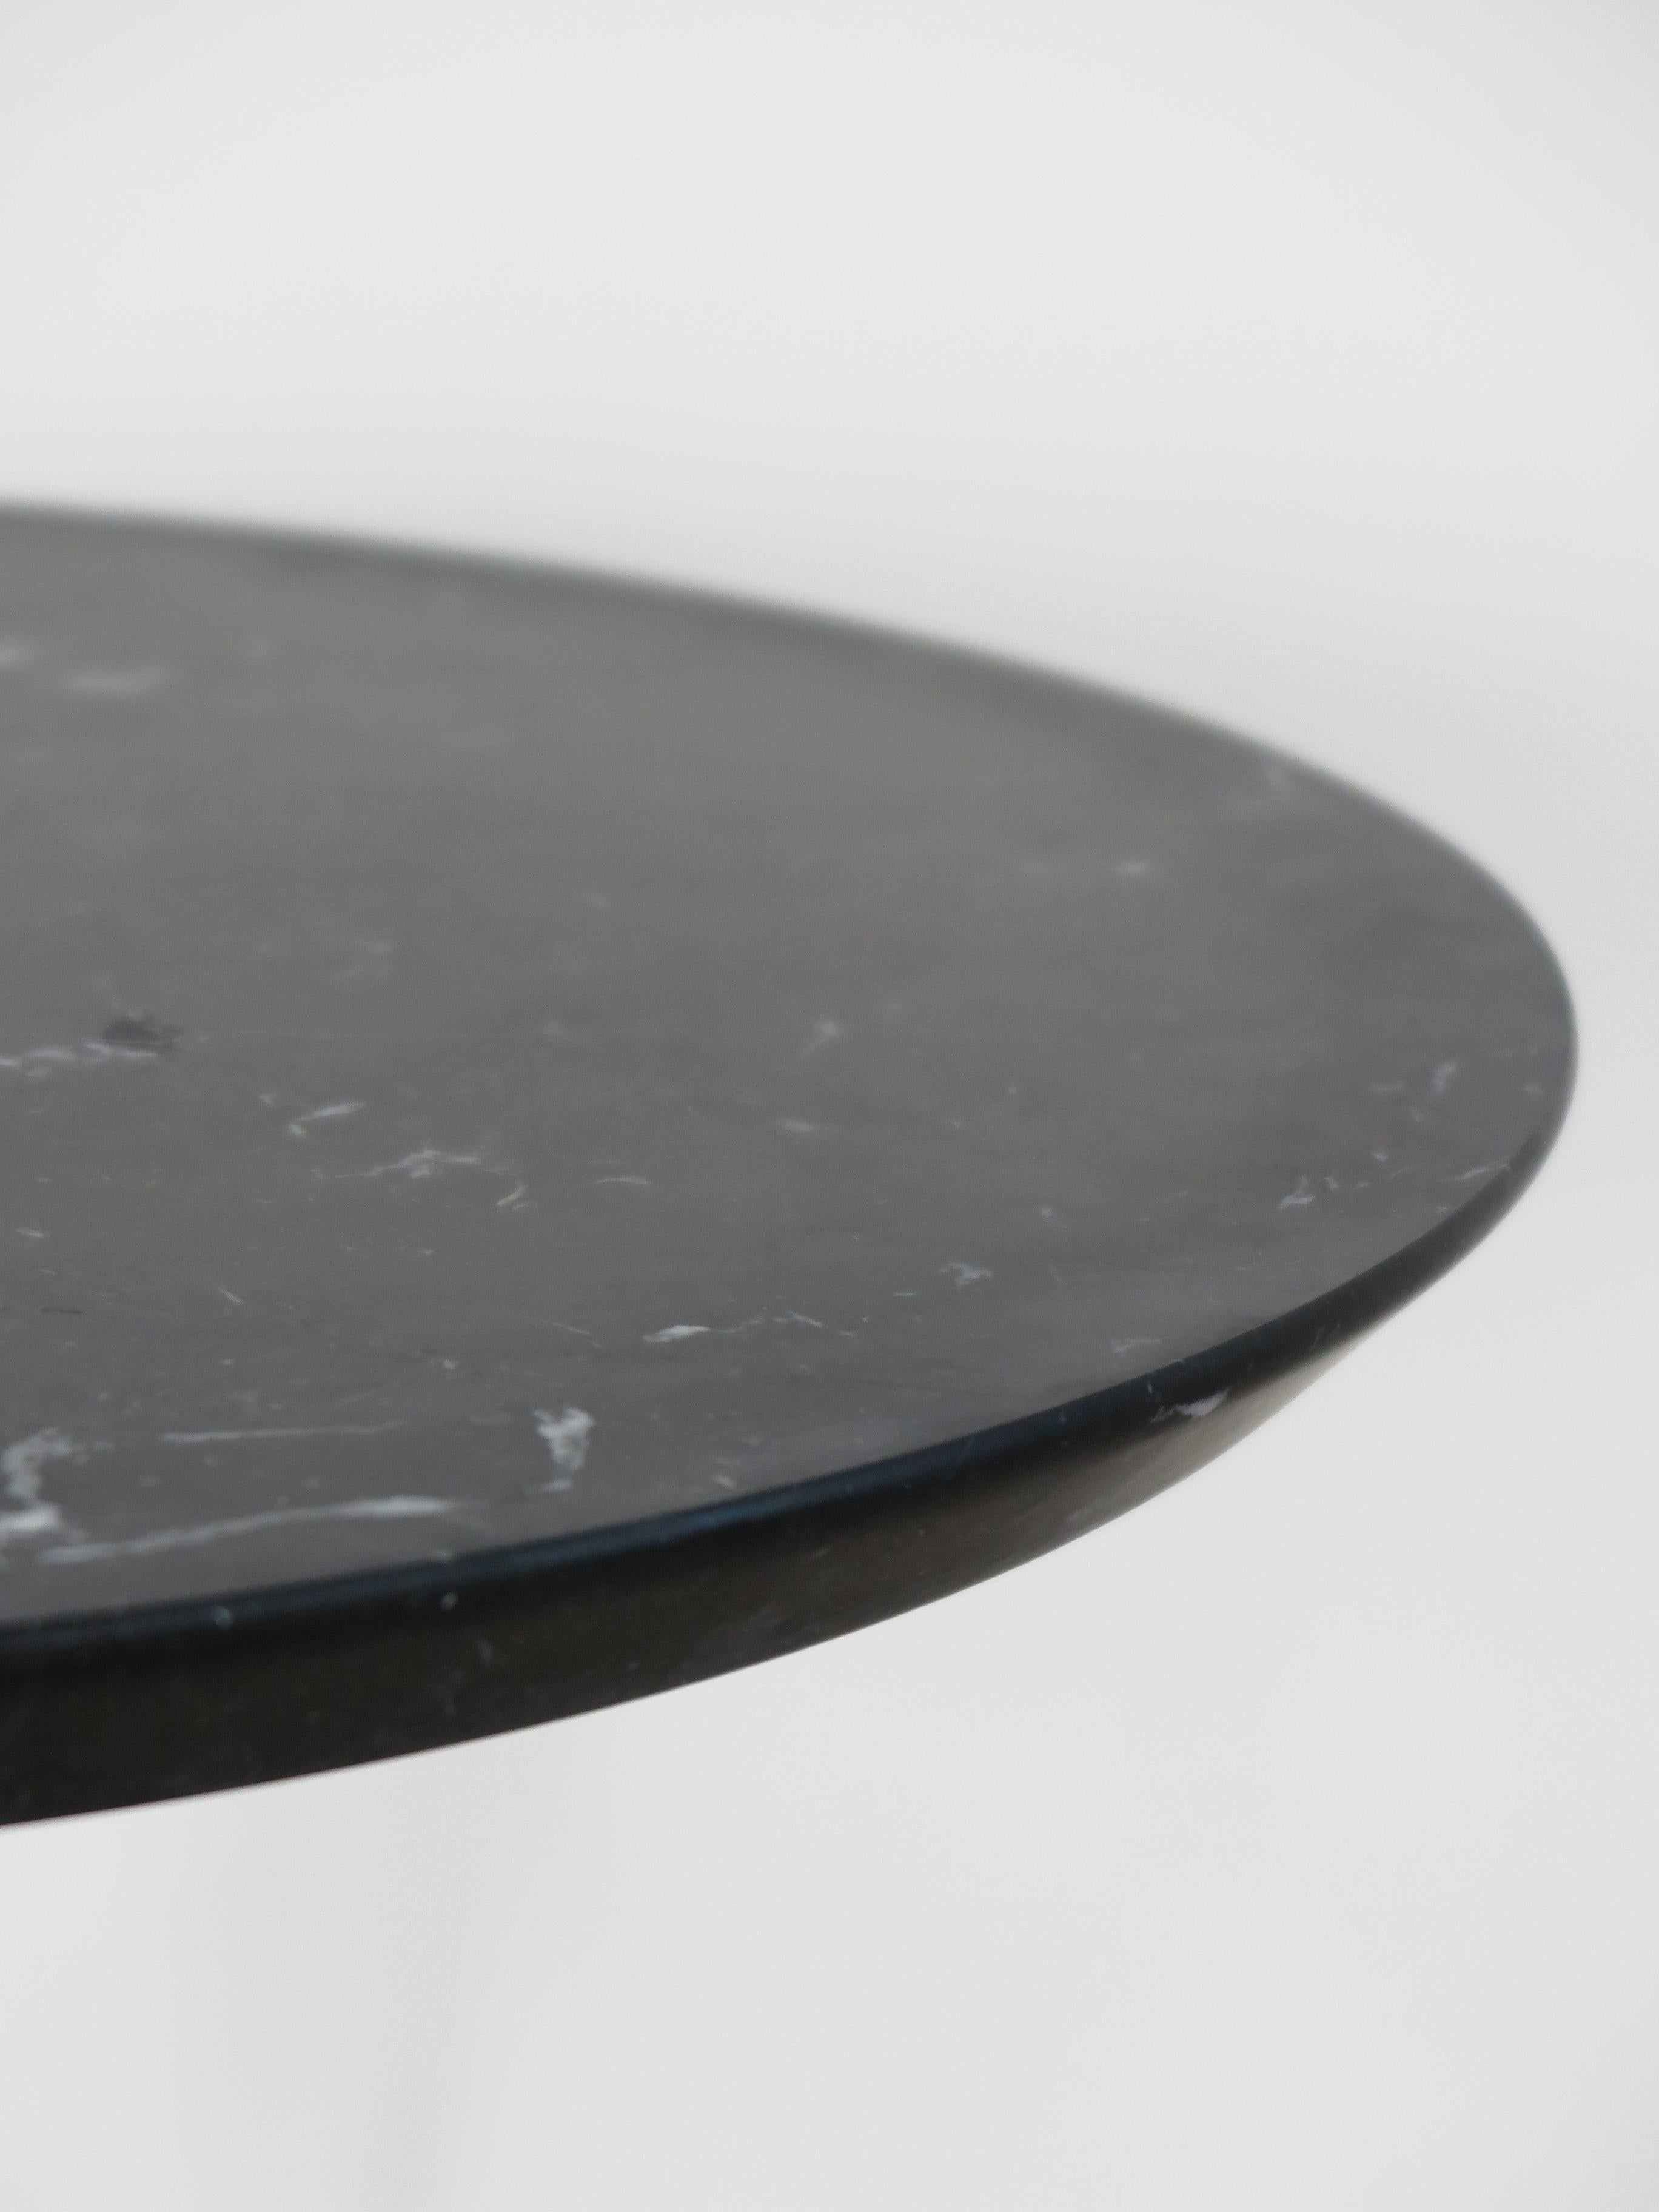 Varnished Italian Contemporary Black Marble Round Coffee Table New Design Capperidicasa For Sale